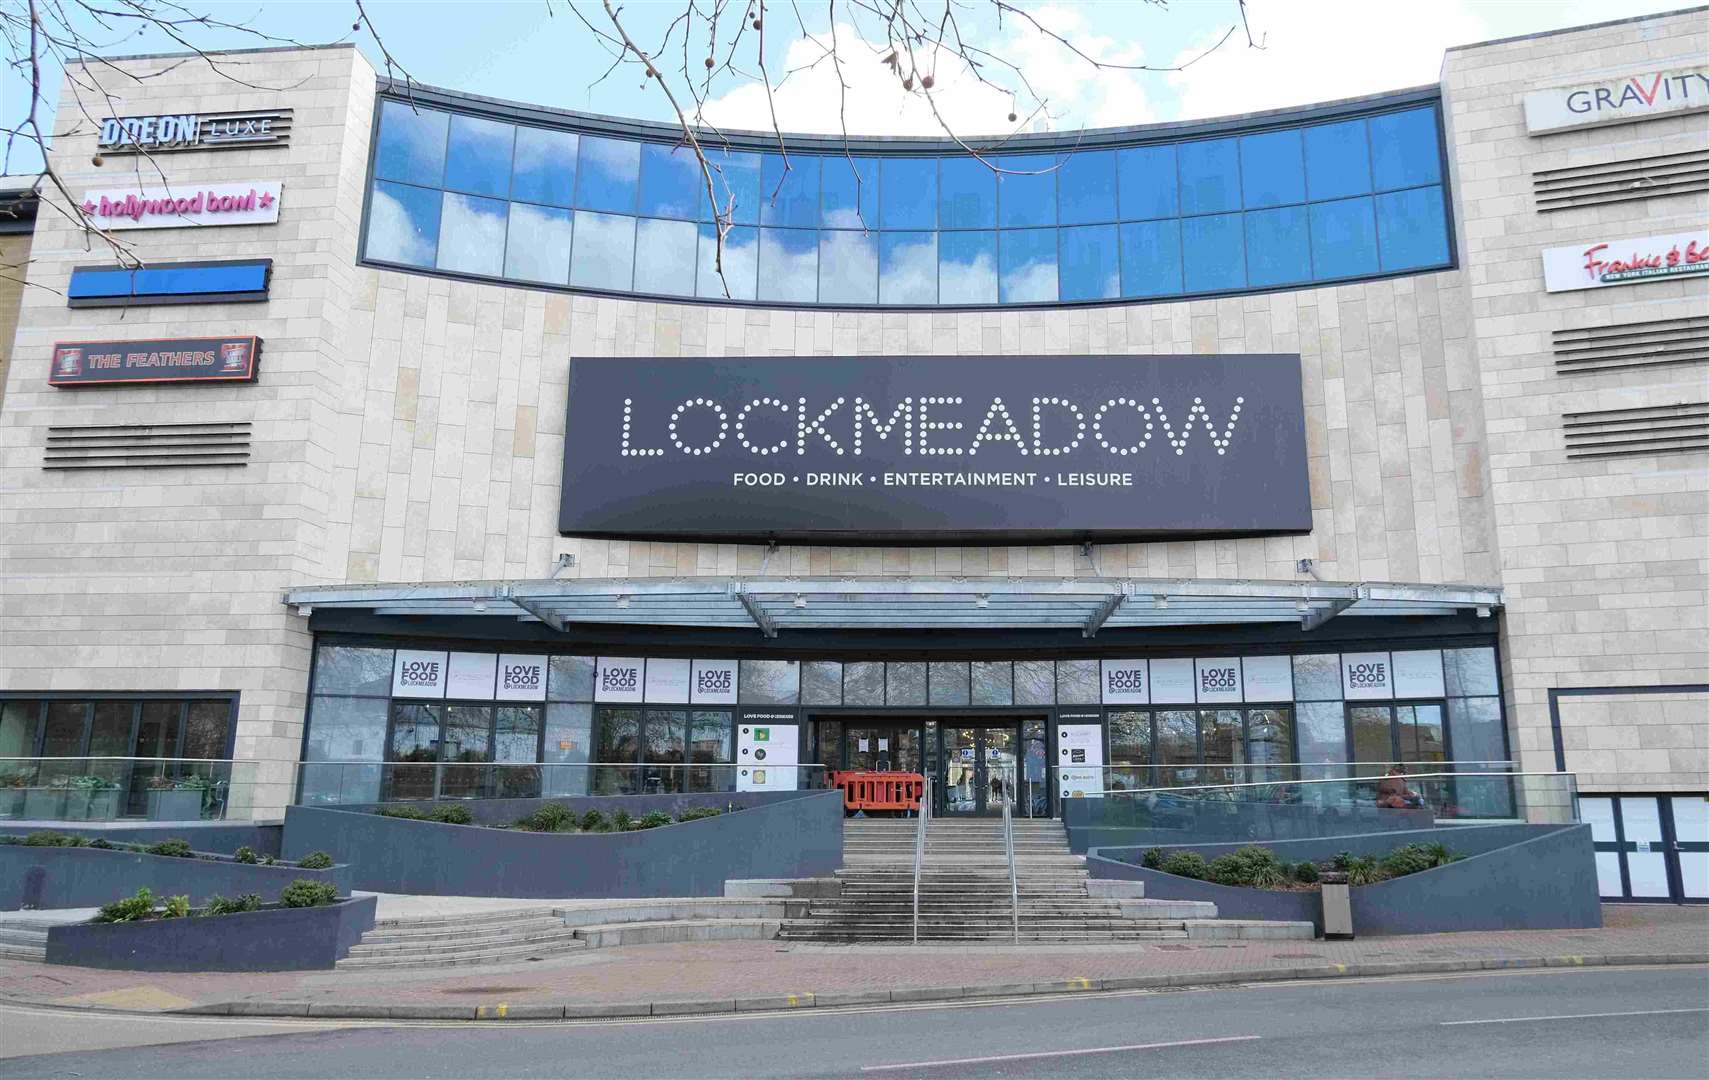 VR World is set to open at Lockmeadow entertainment complex in Maidstone